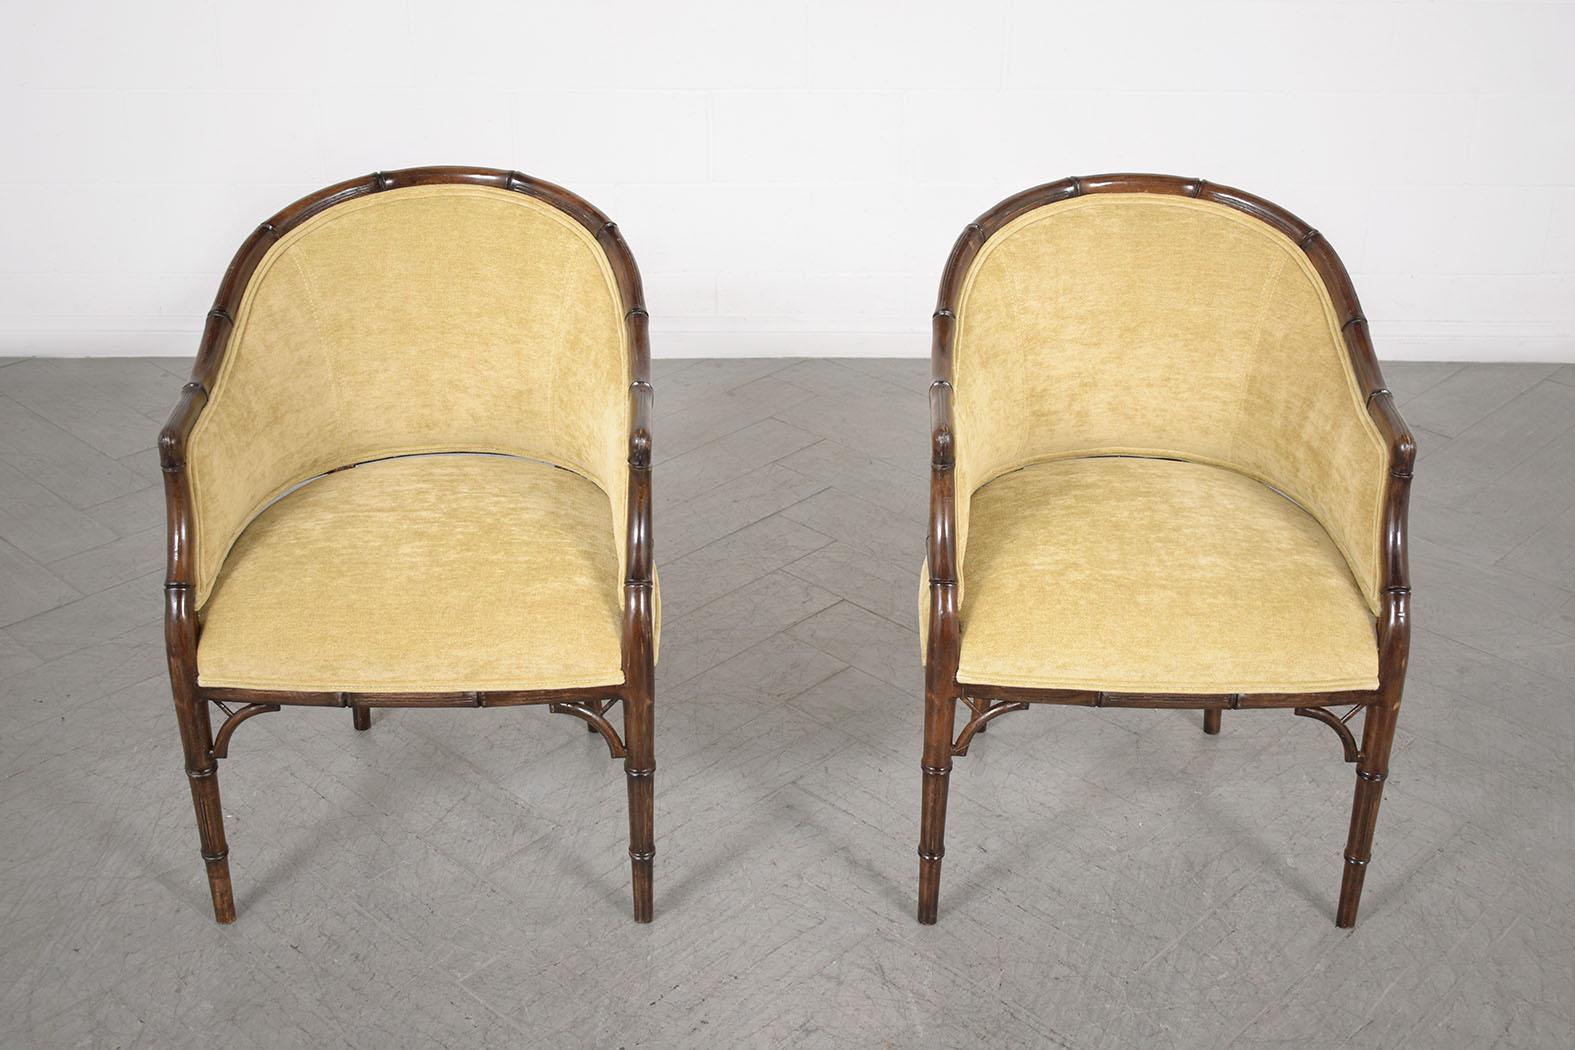 Mid-20th Century Vintage Hollywood Regency Velvet Armchairs with Bamboo-Carved Frame For Sale